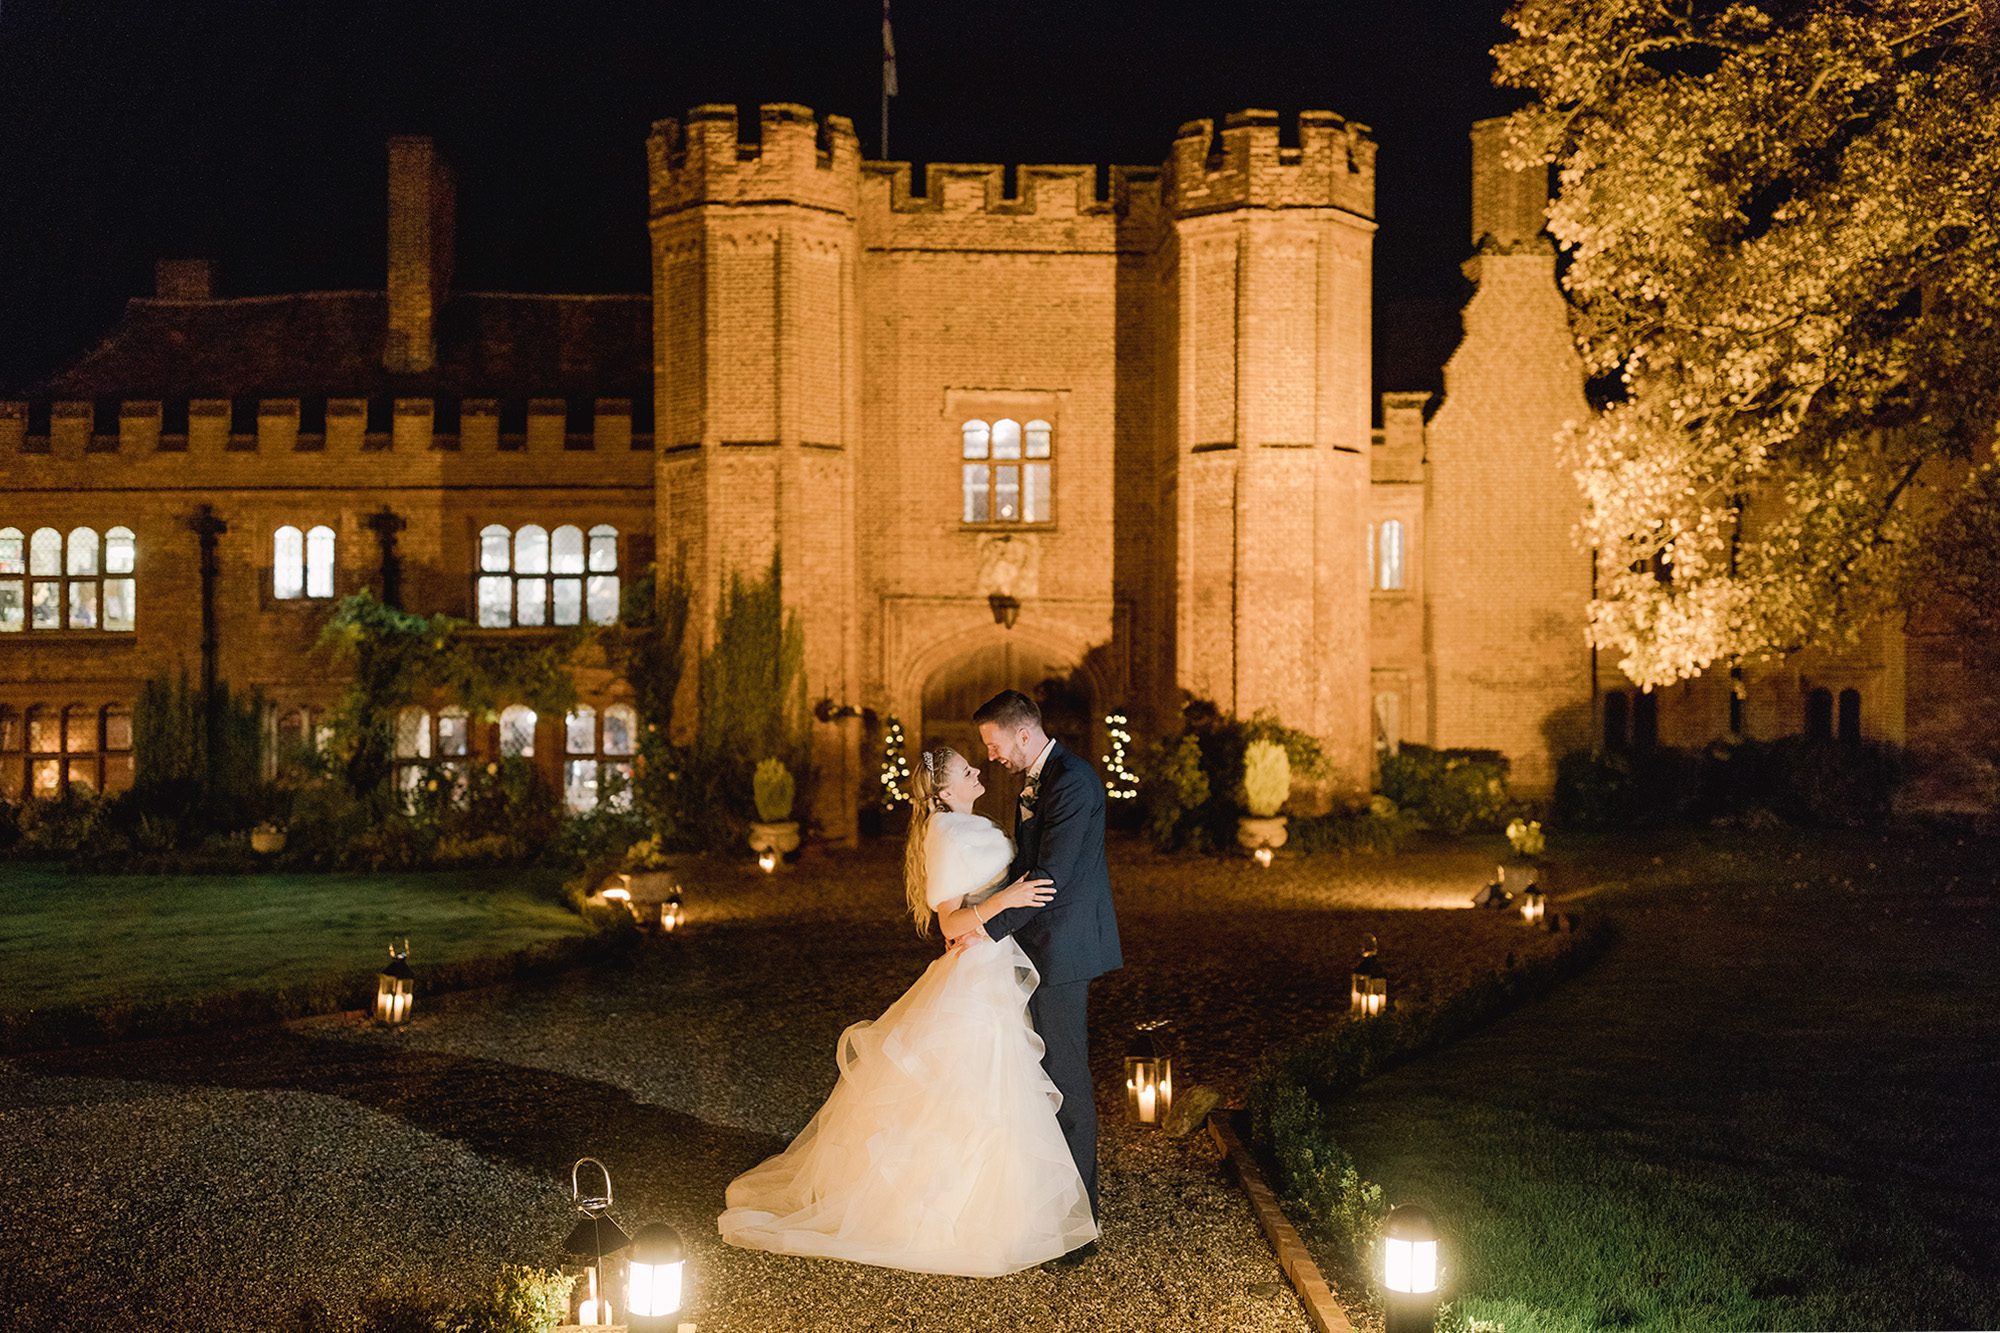 Bride and groom hug closely on their wedding day at Leez Priory in Essex.